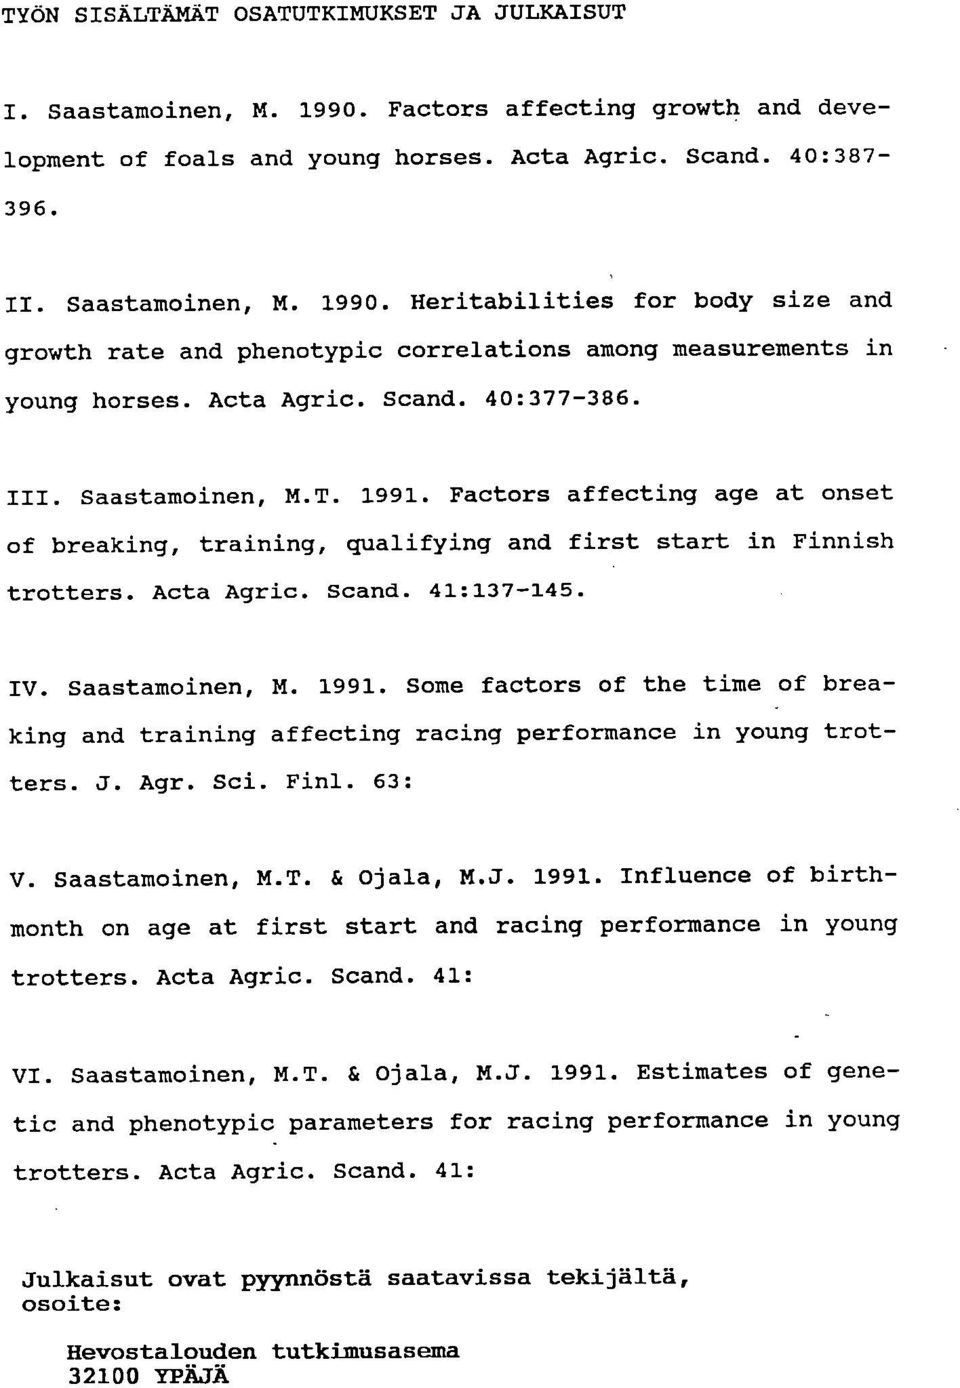 Saastamoinen, M. 1991. Some factors of the time of breaking and training affecting racing performance in young trotters. J. Agr. Sci. Finl. 63: Saastamoinen, M.T. & Ojala, M.J. 1991. Influence of birthmonth on age at first start and racing performance in young trotters.